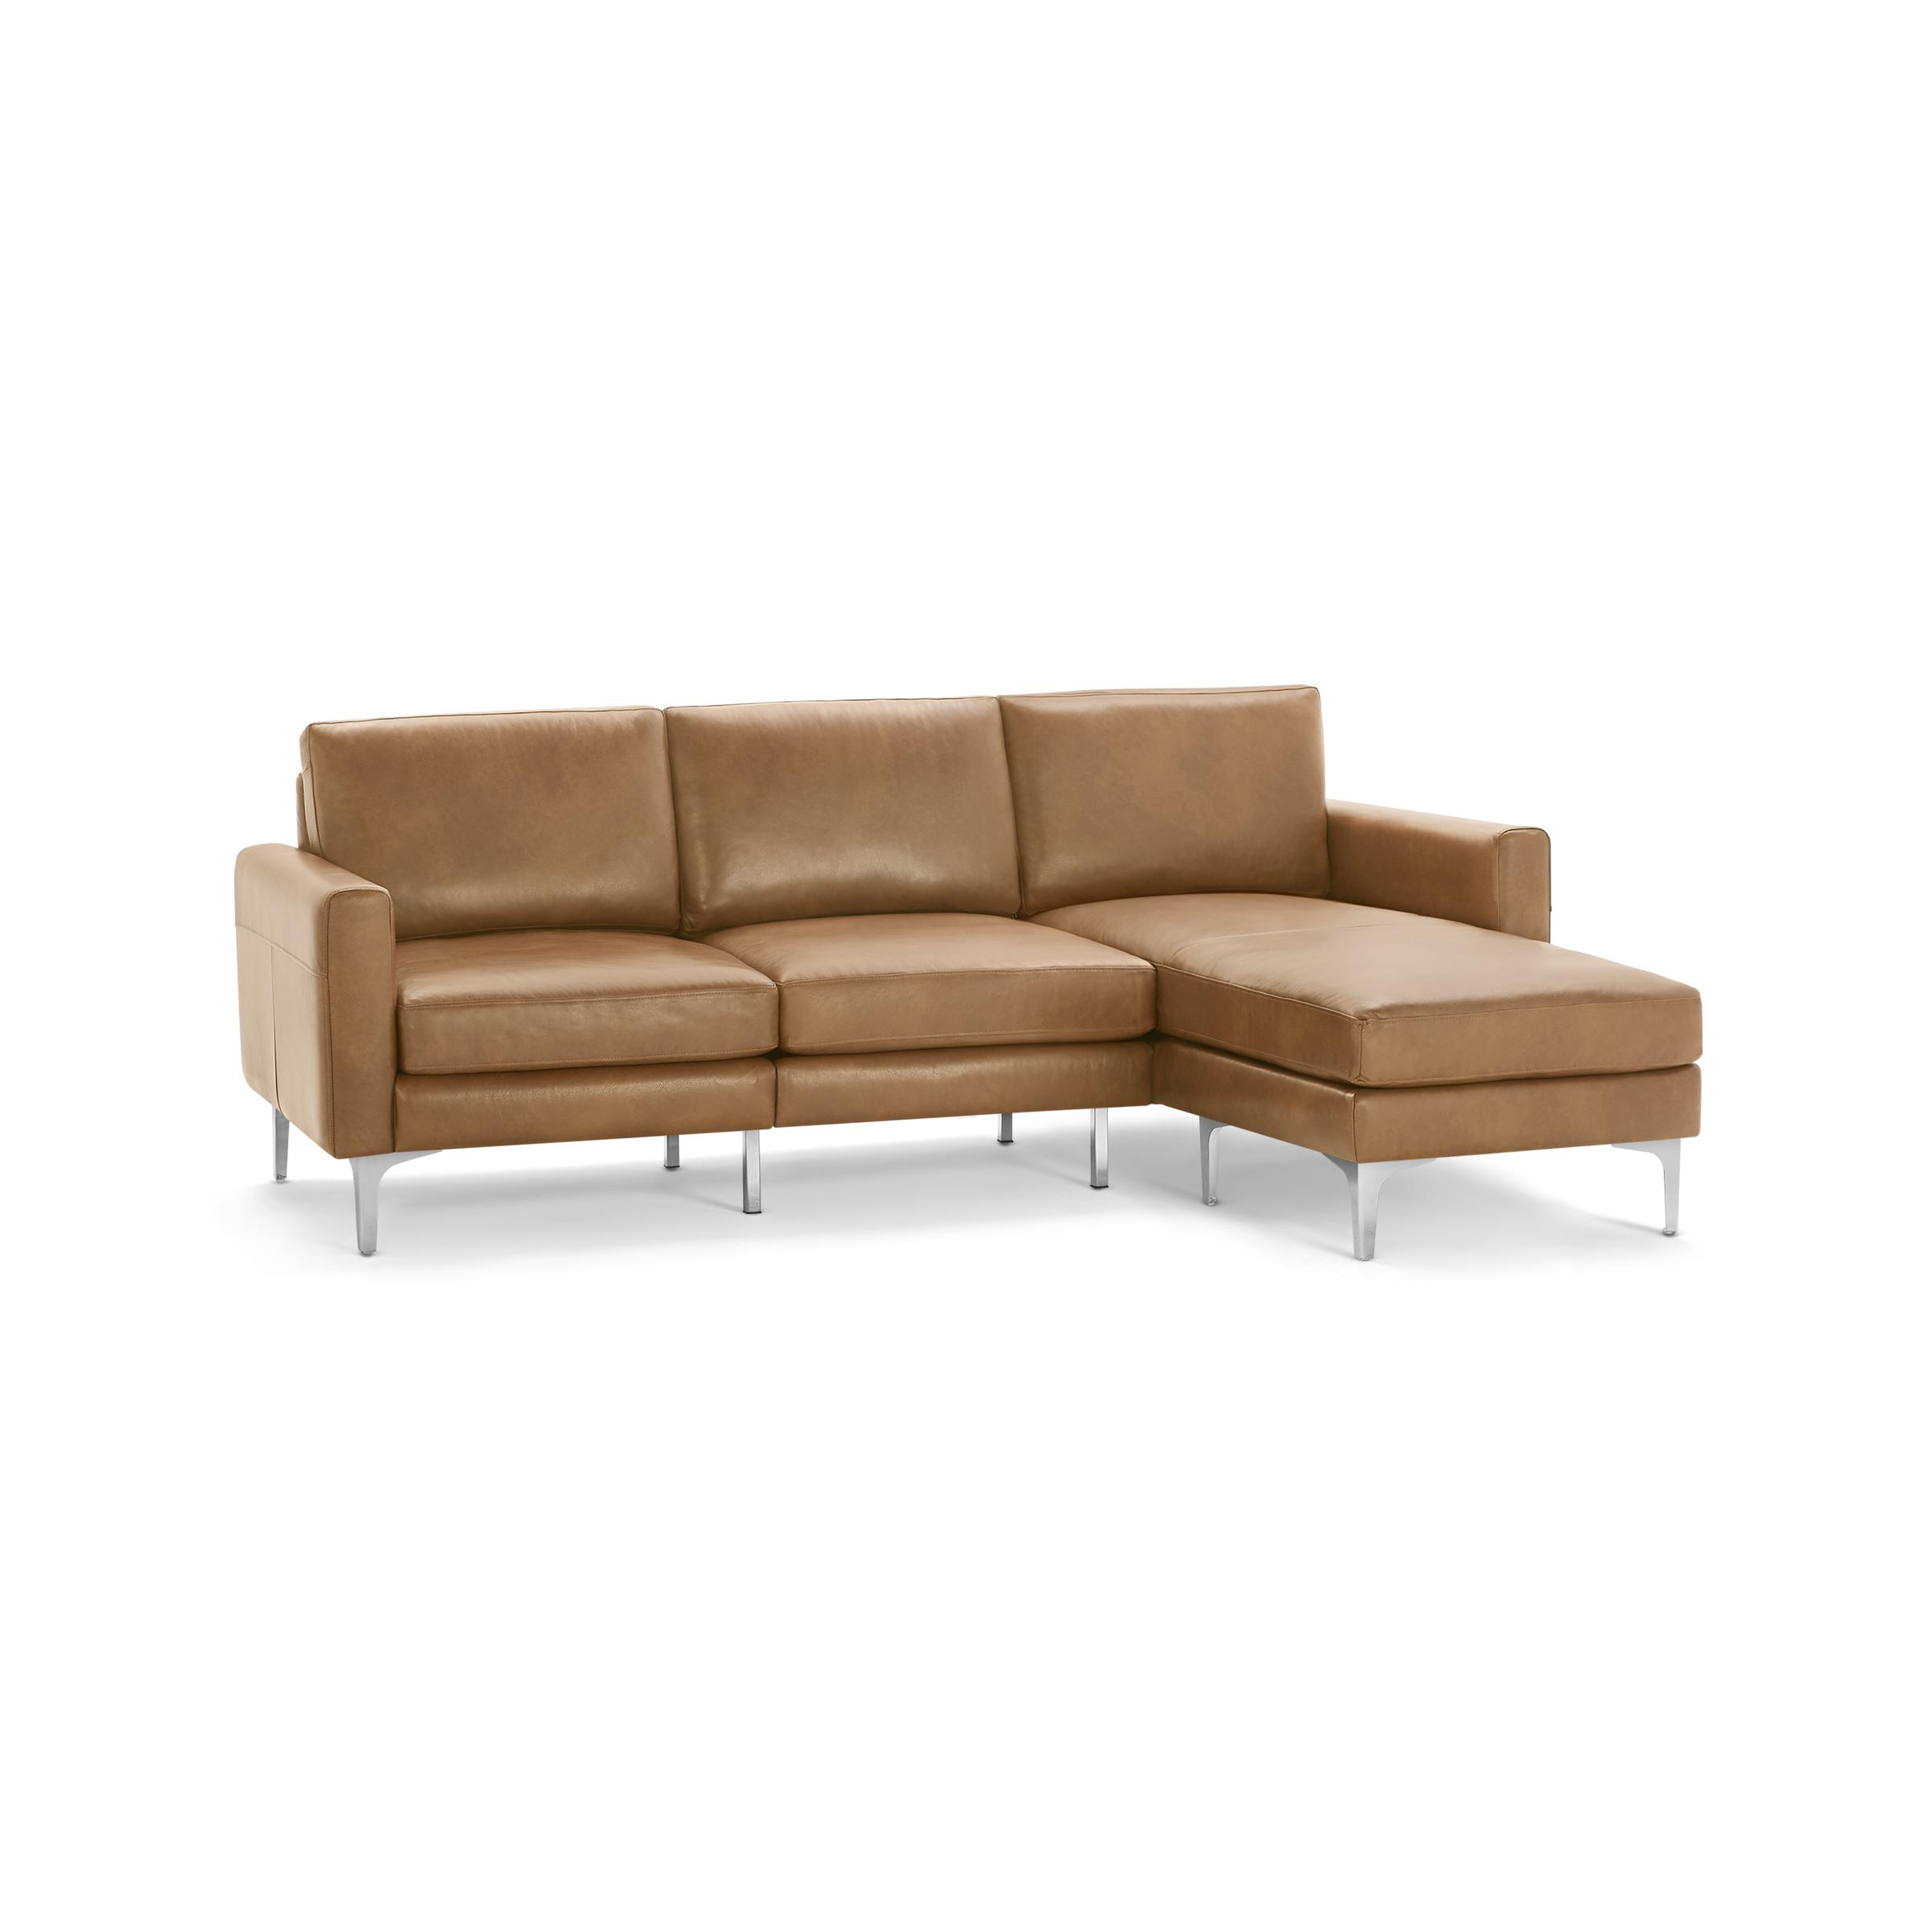 Nomad Leather Sectional in Camel, Chrome Legs - Burrow